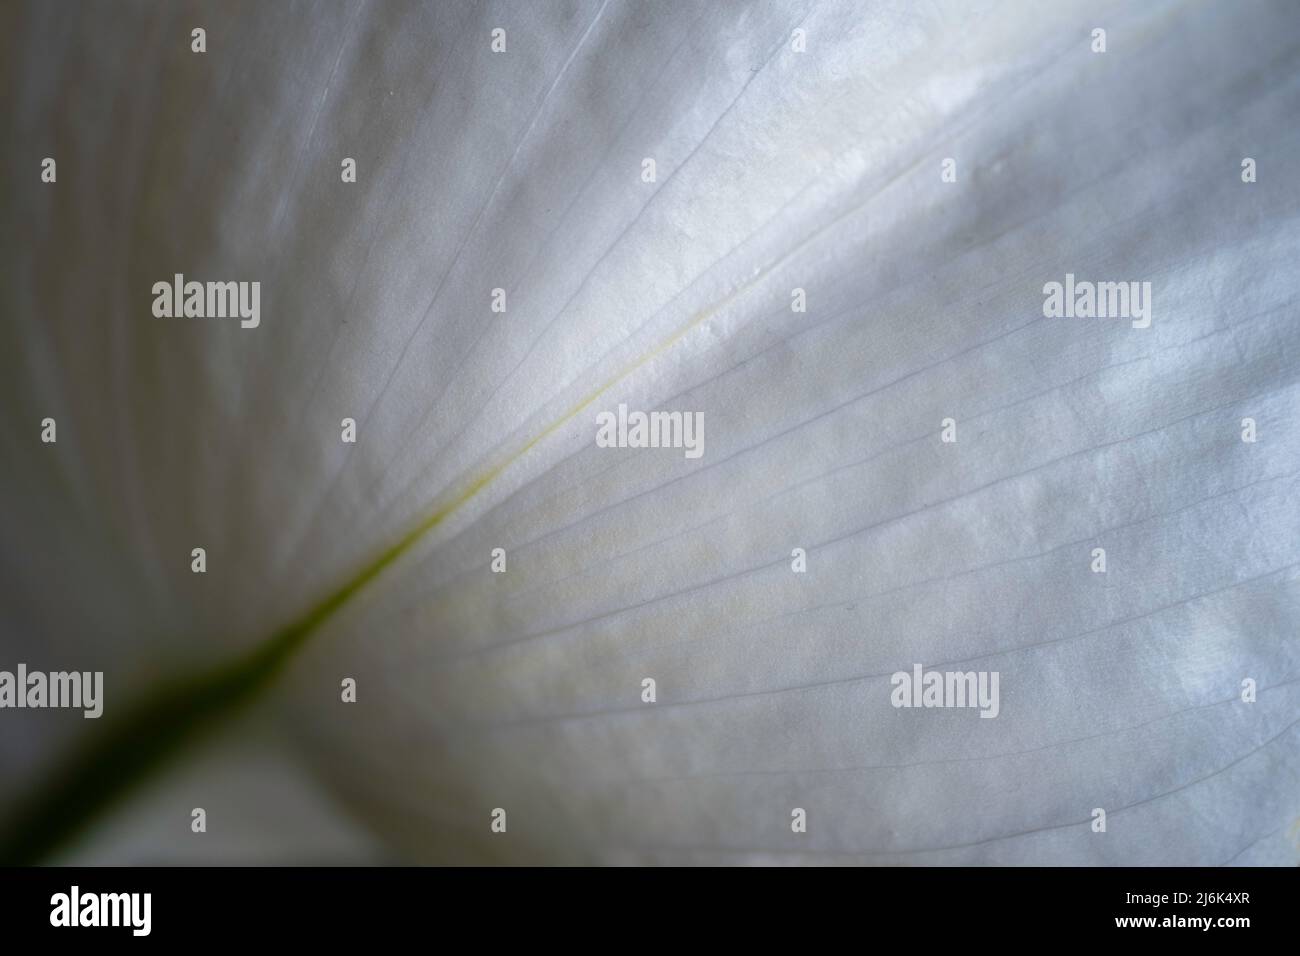 Close up of a single thin-veined petal of the white flower called Spath of Peace Lilly (Spathiphyllum cochlearispathum) with narrow depth of field Stock Photo